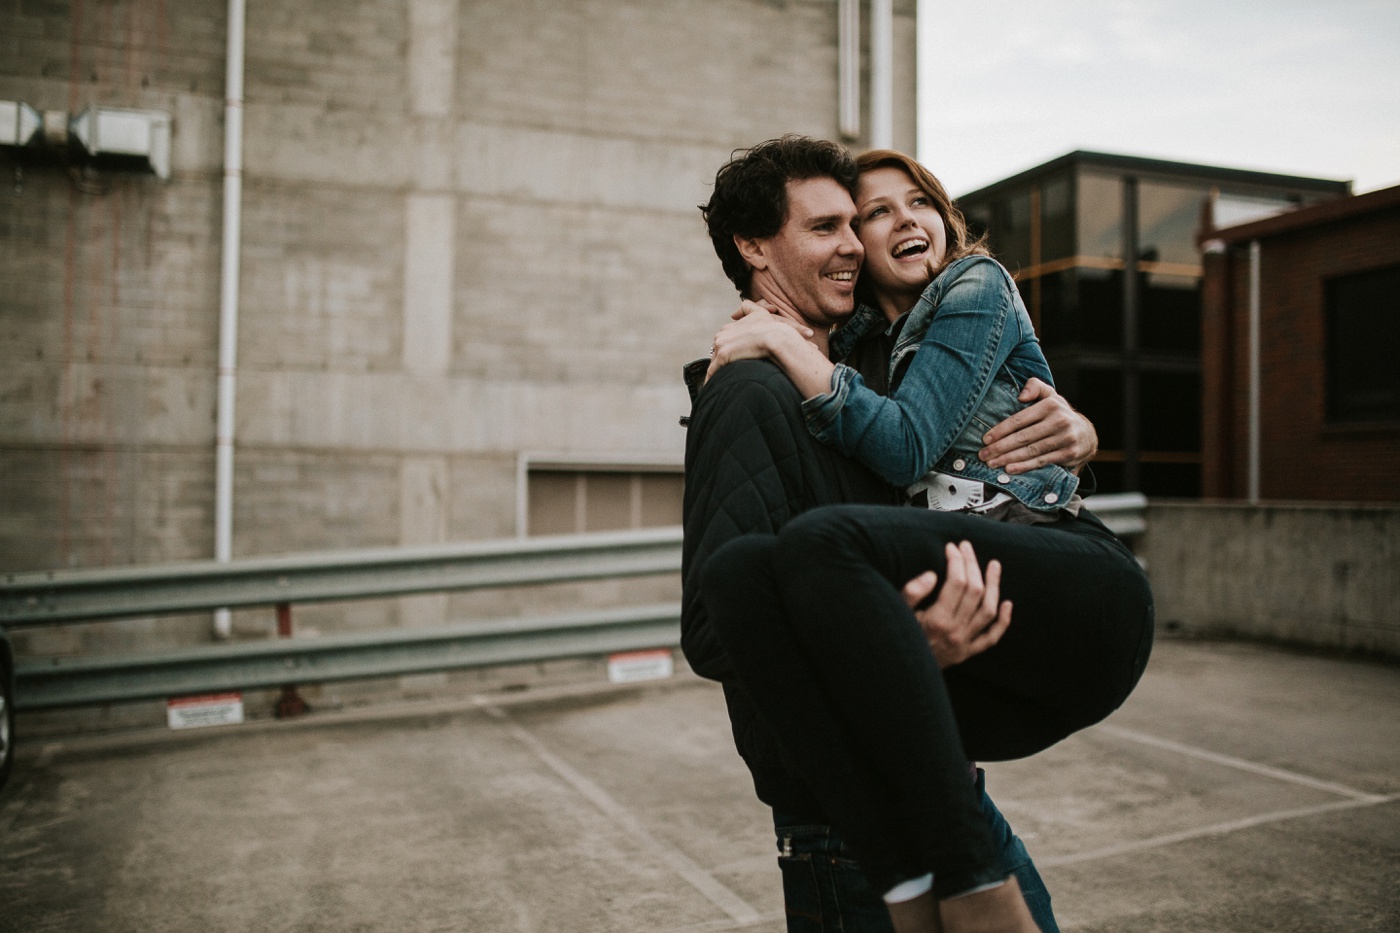 heli-alex_melbourne-fun-candid-gritty-relaxed-city-urban-couples-engagement-session_melbourne-wedding-photography_28